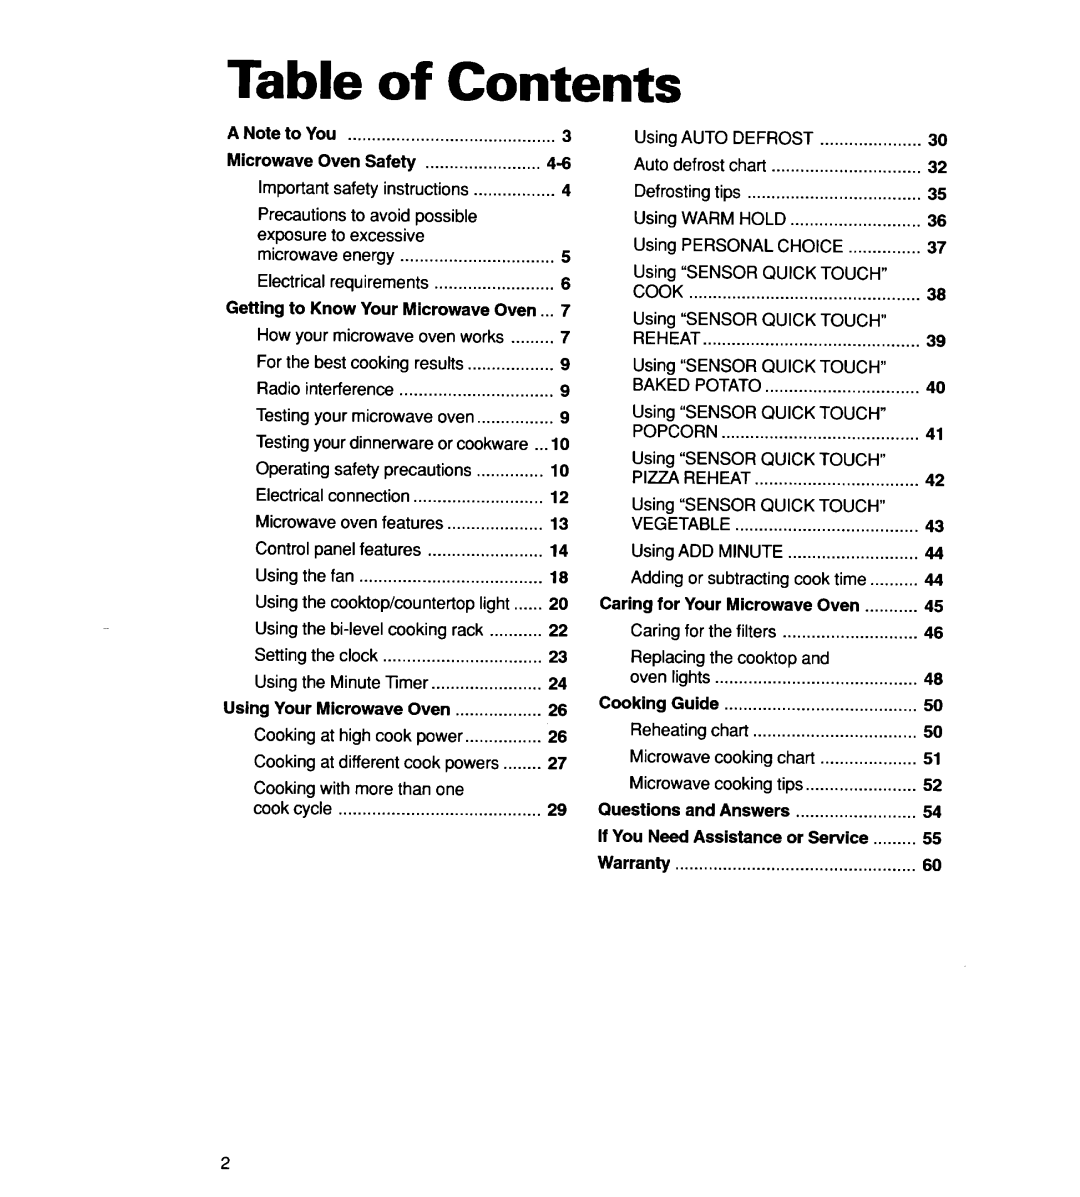 Whirlpool MH7135XE warranty Table of Contents 